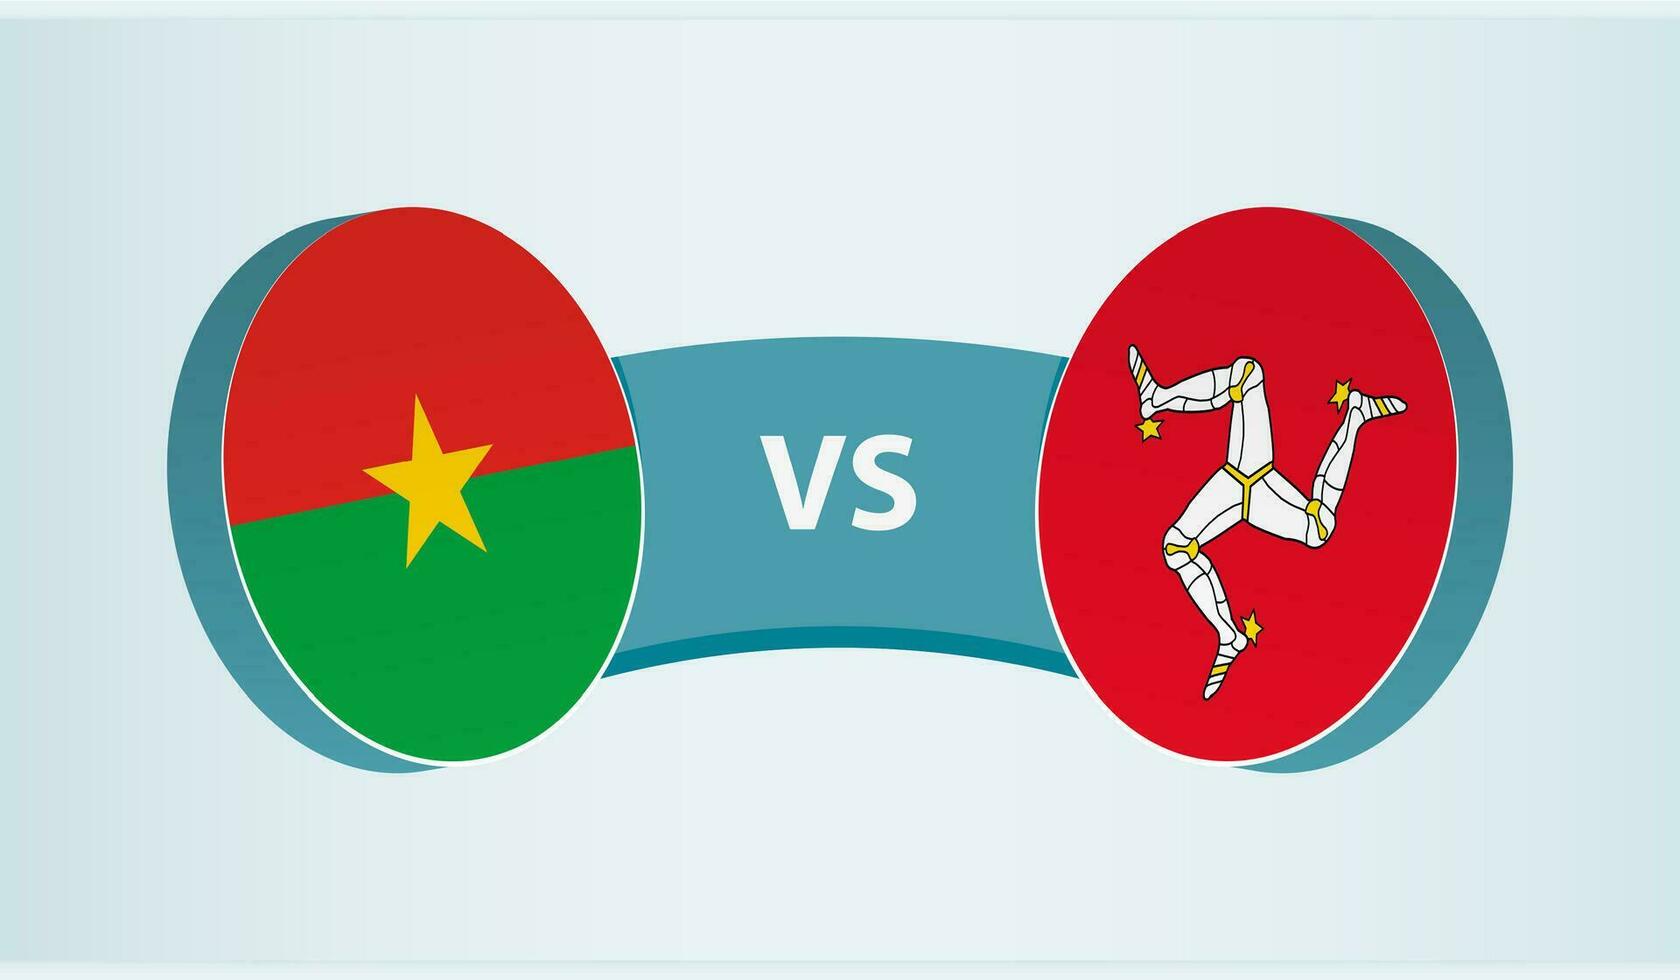 Burkina Faso versus Isle of Man, team sports competition concept. vector